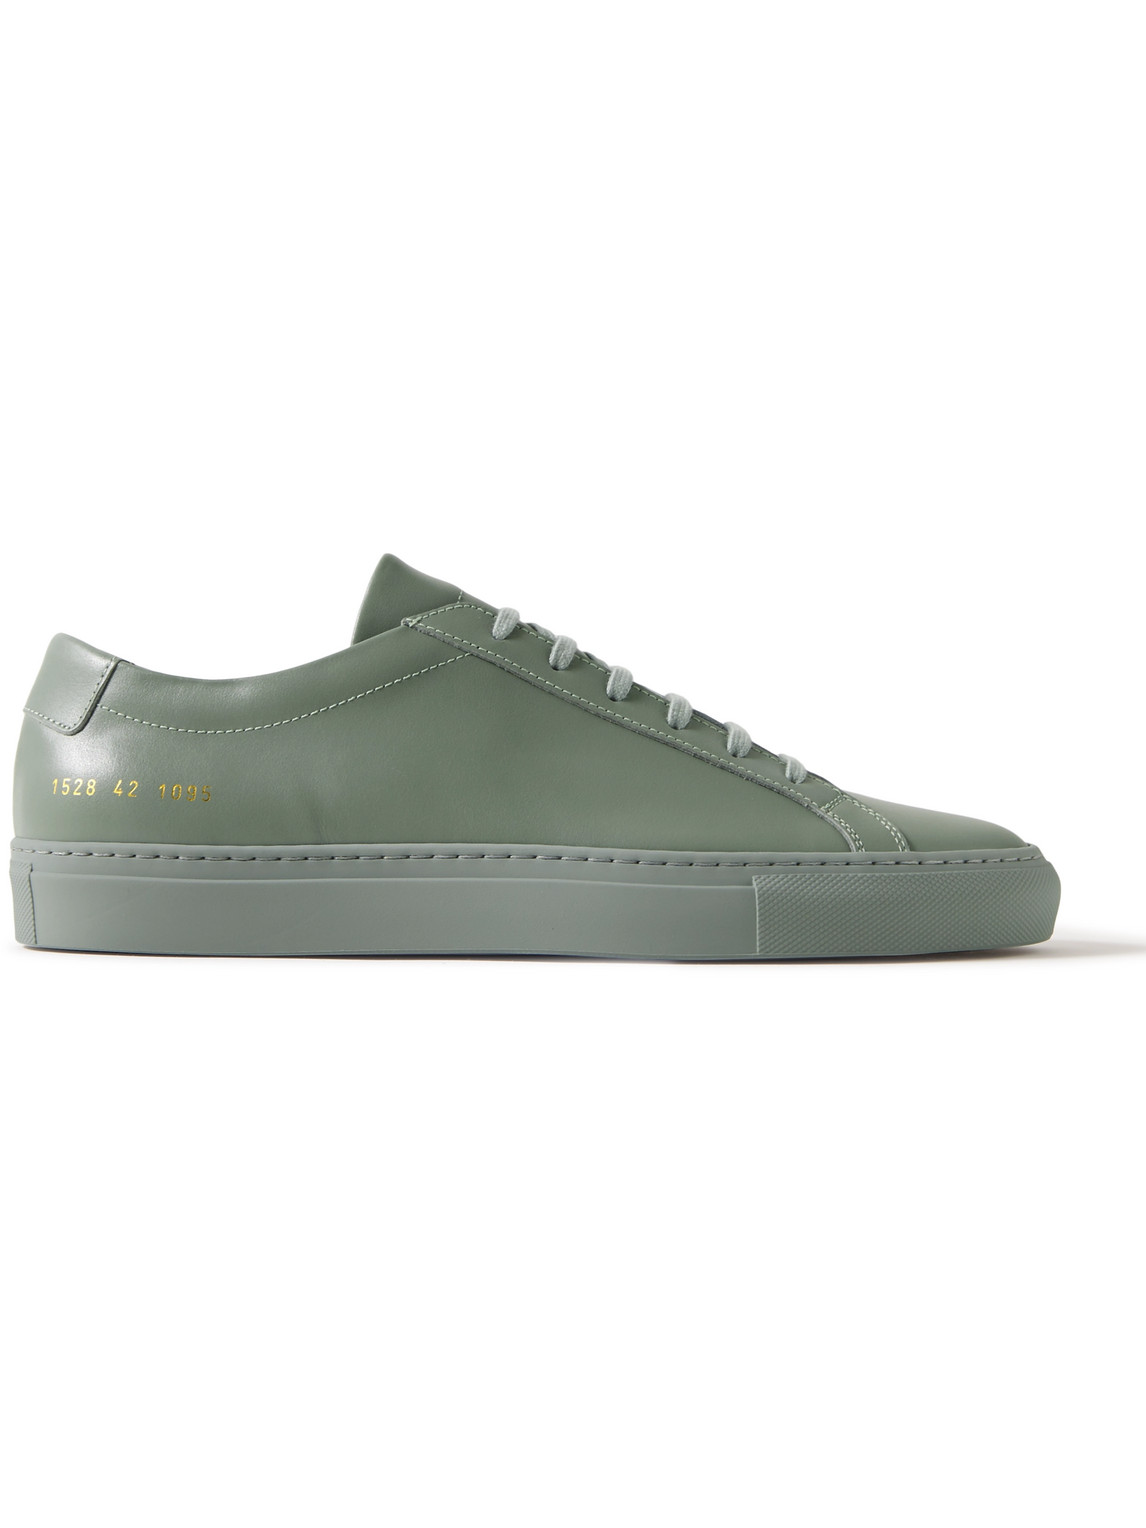 Common Projects Original Achilles Leather Sneakers In Green